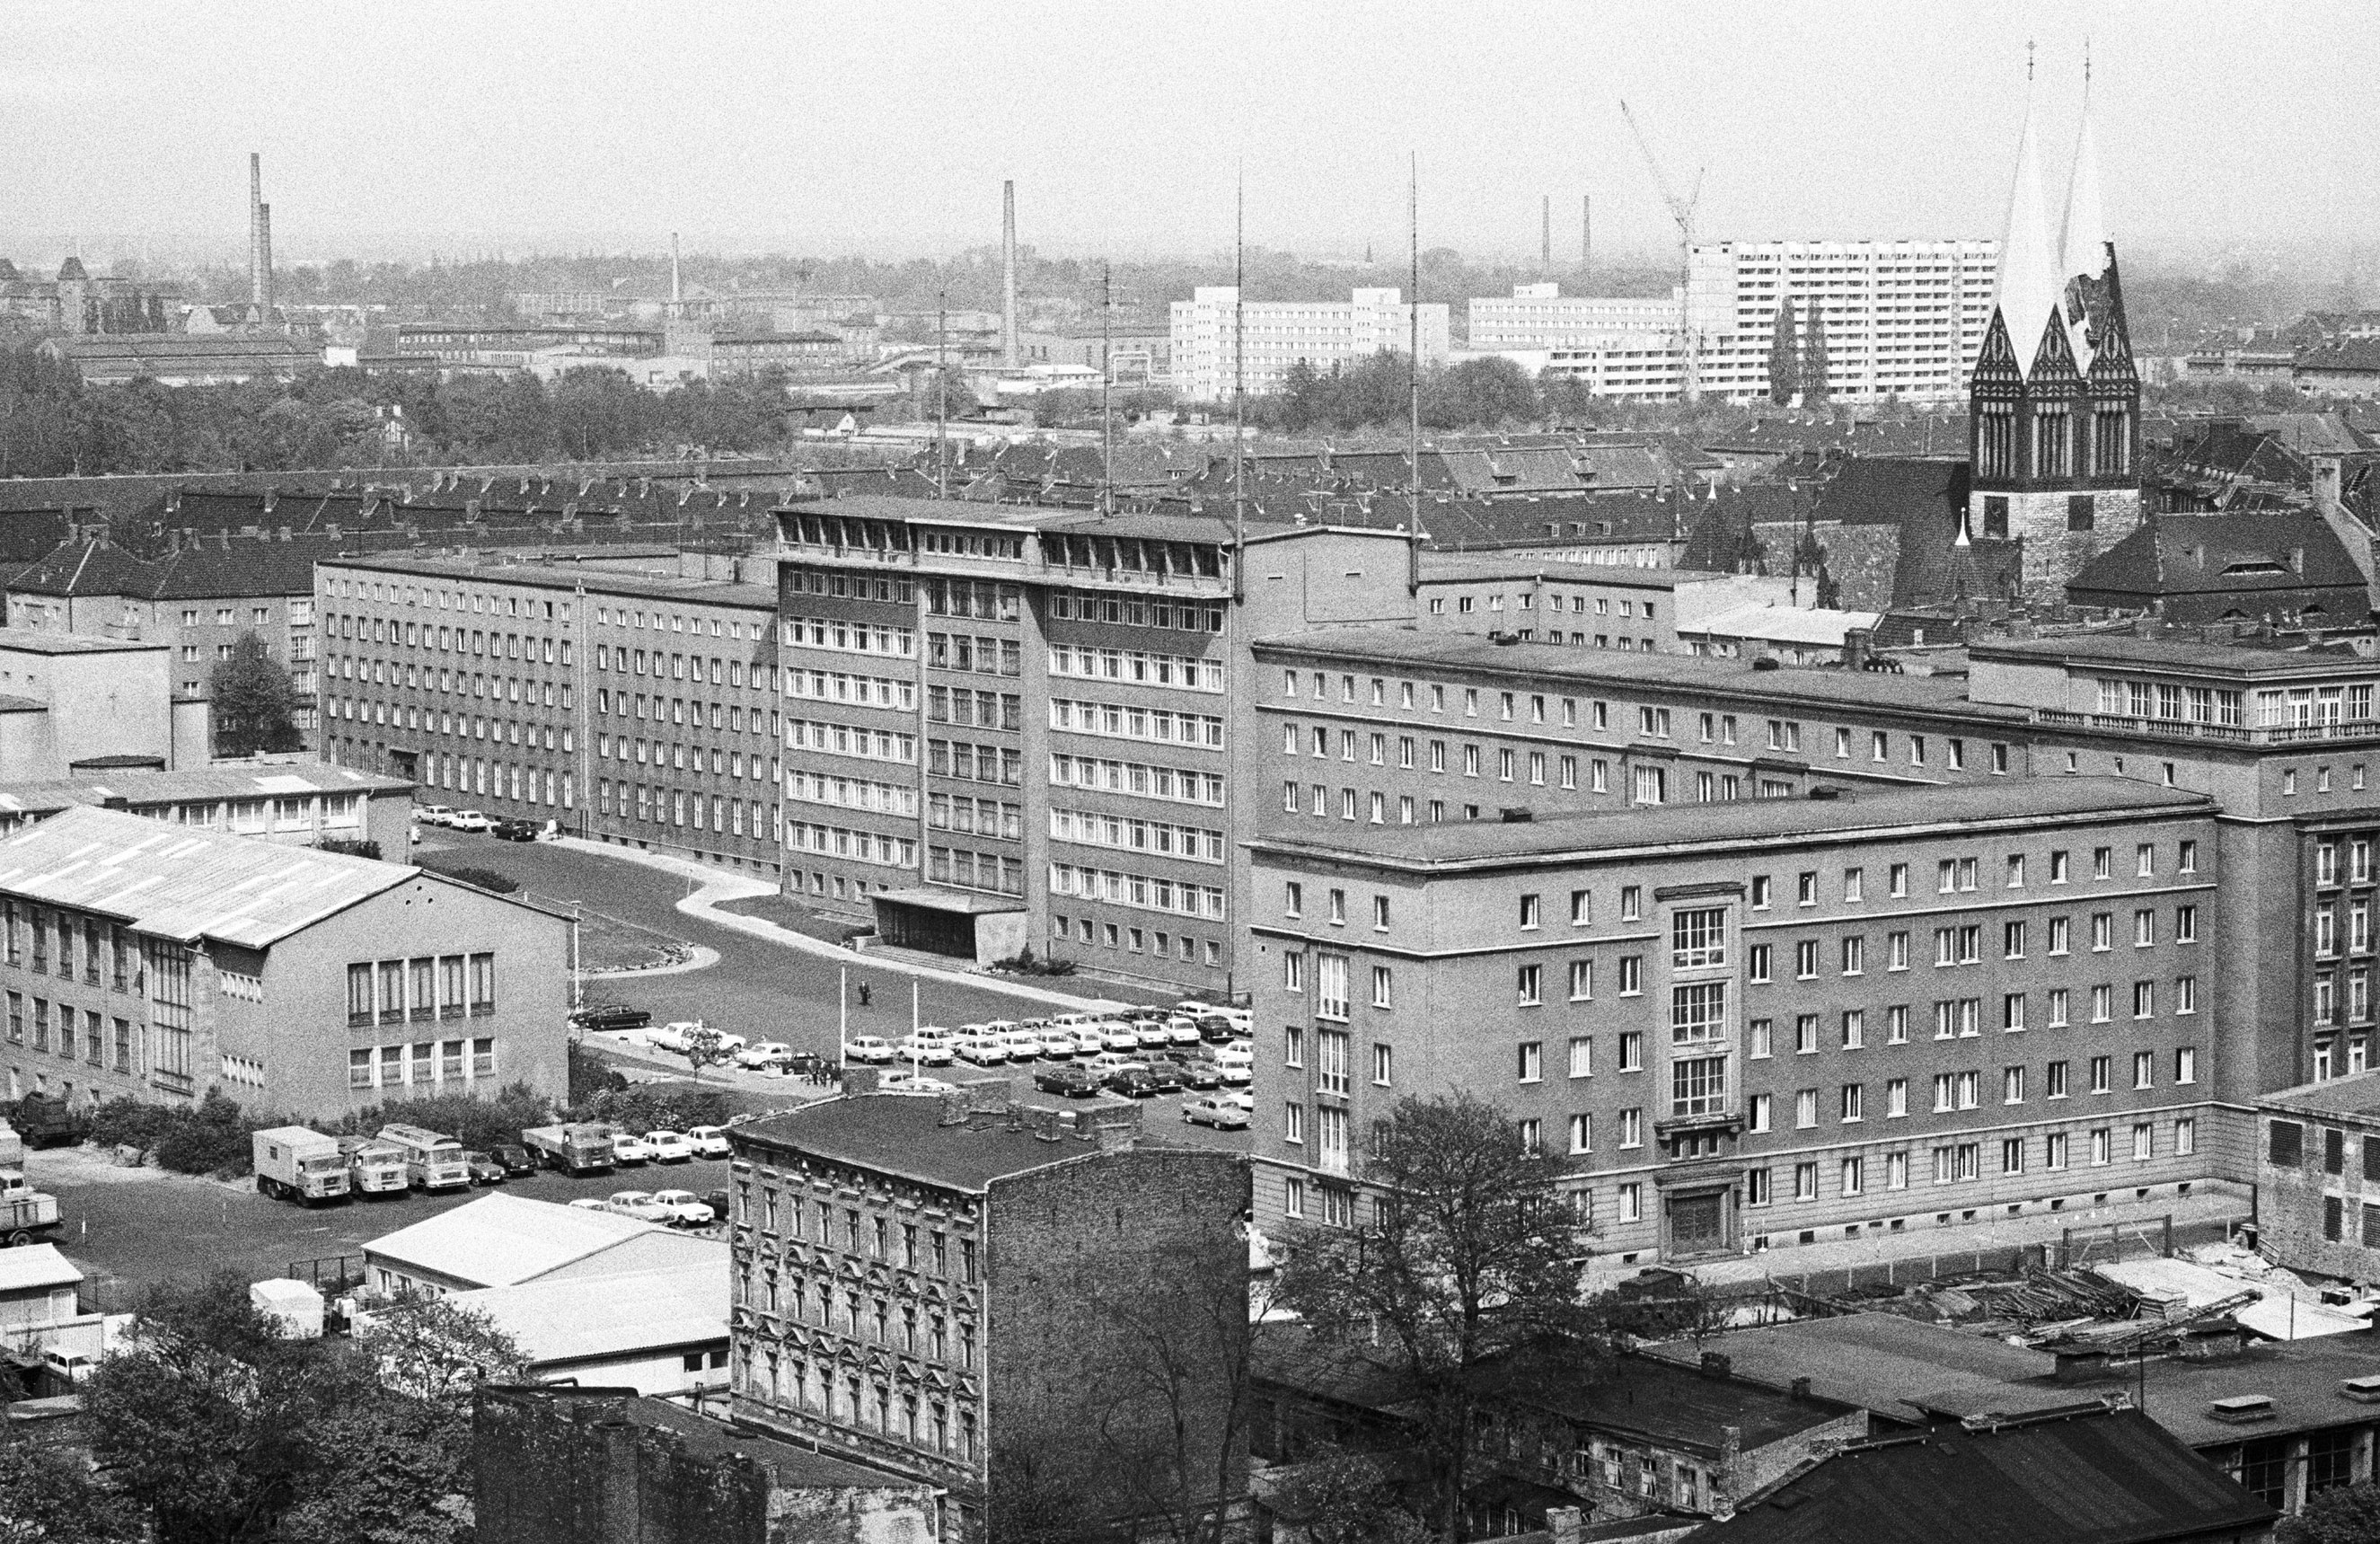 Building of the Ministry for State Security in East Berlin on April 26, 1974.